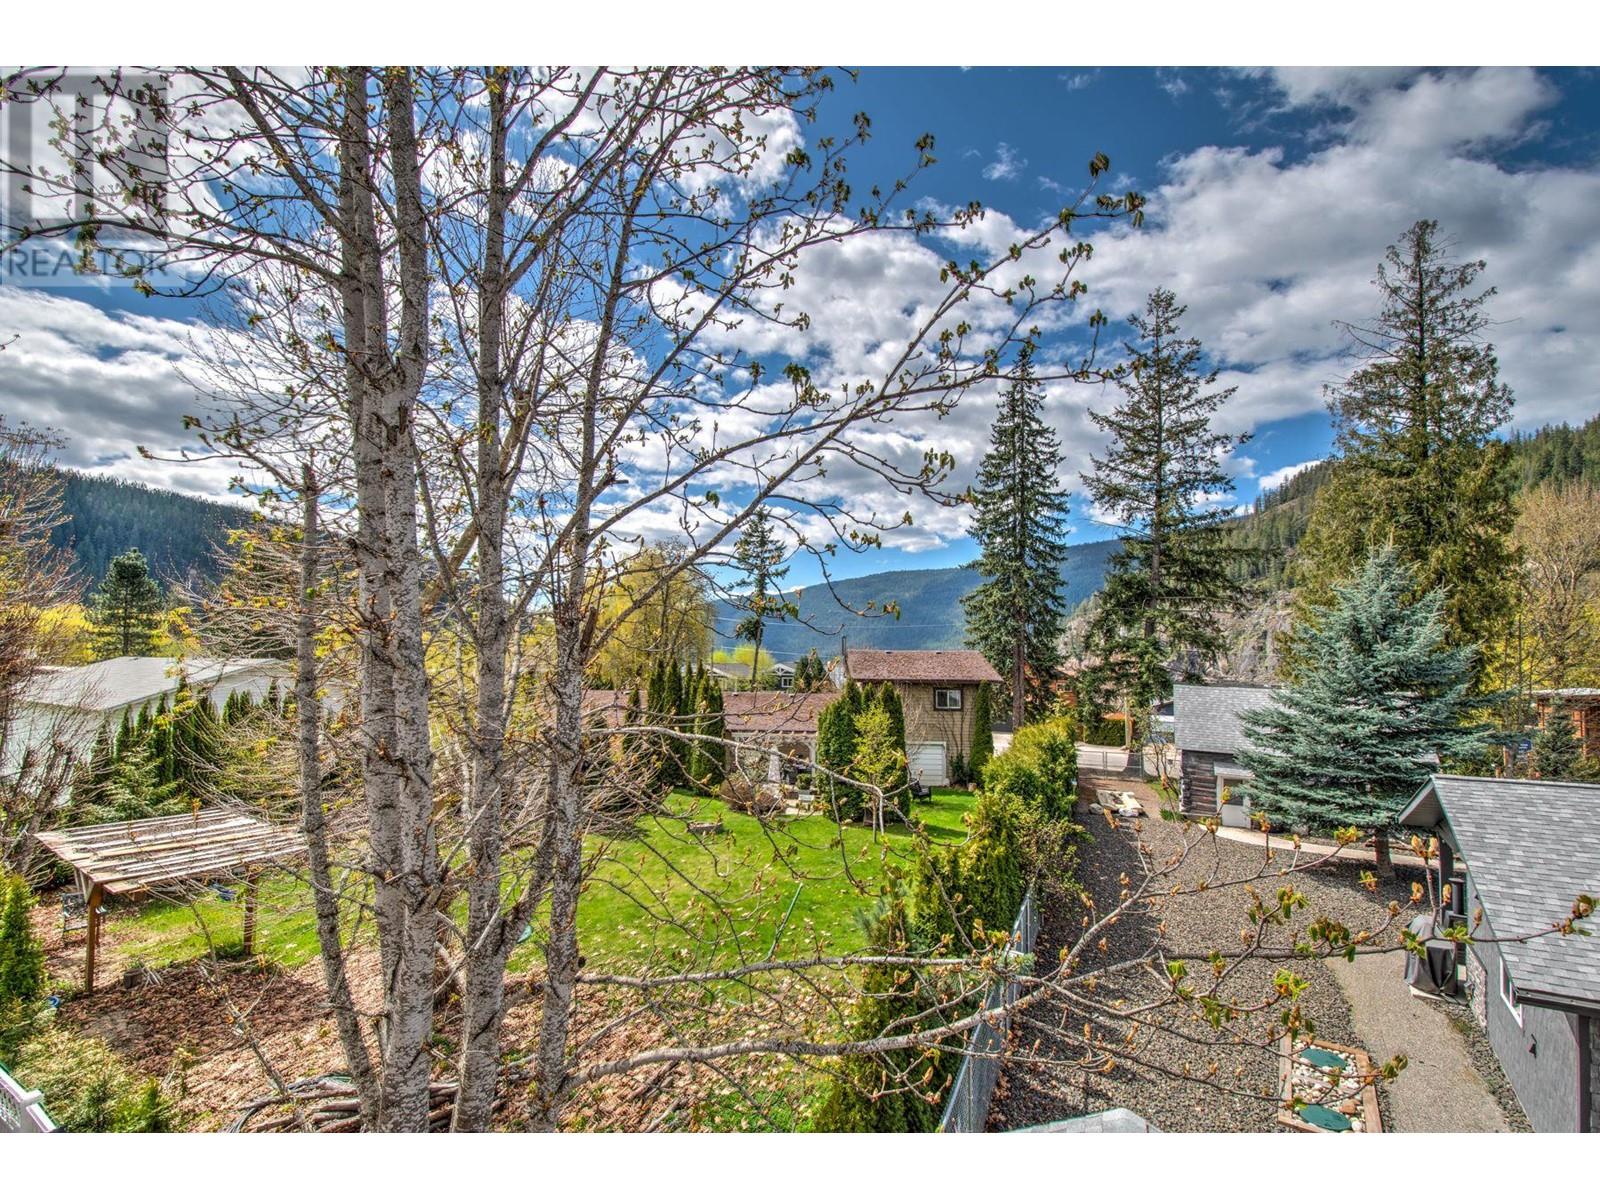  718 Swansea Point Road, Sicamous